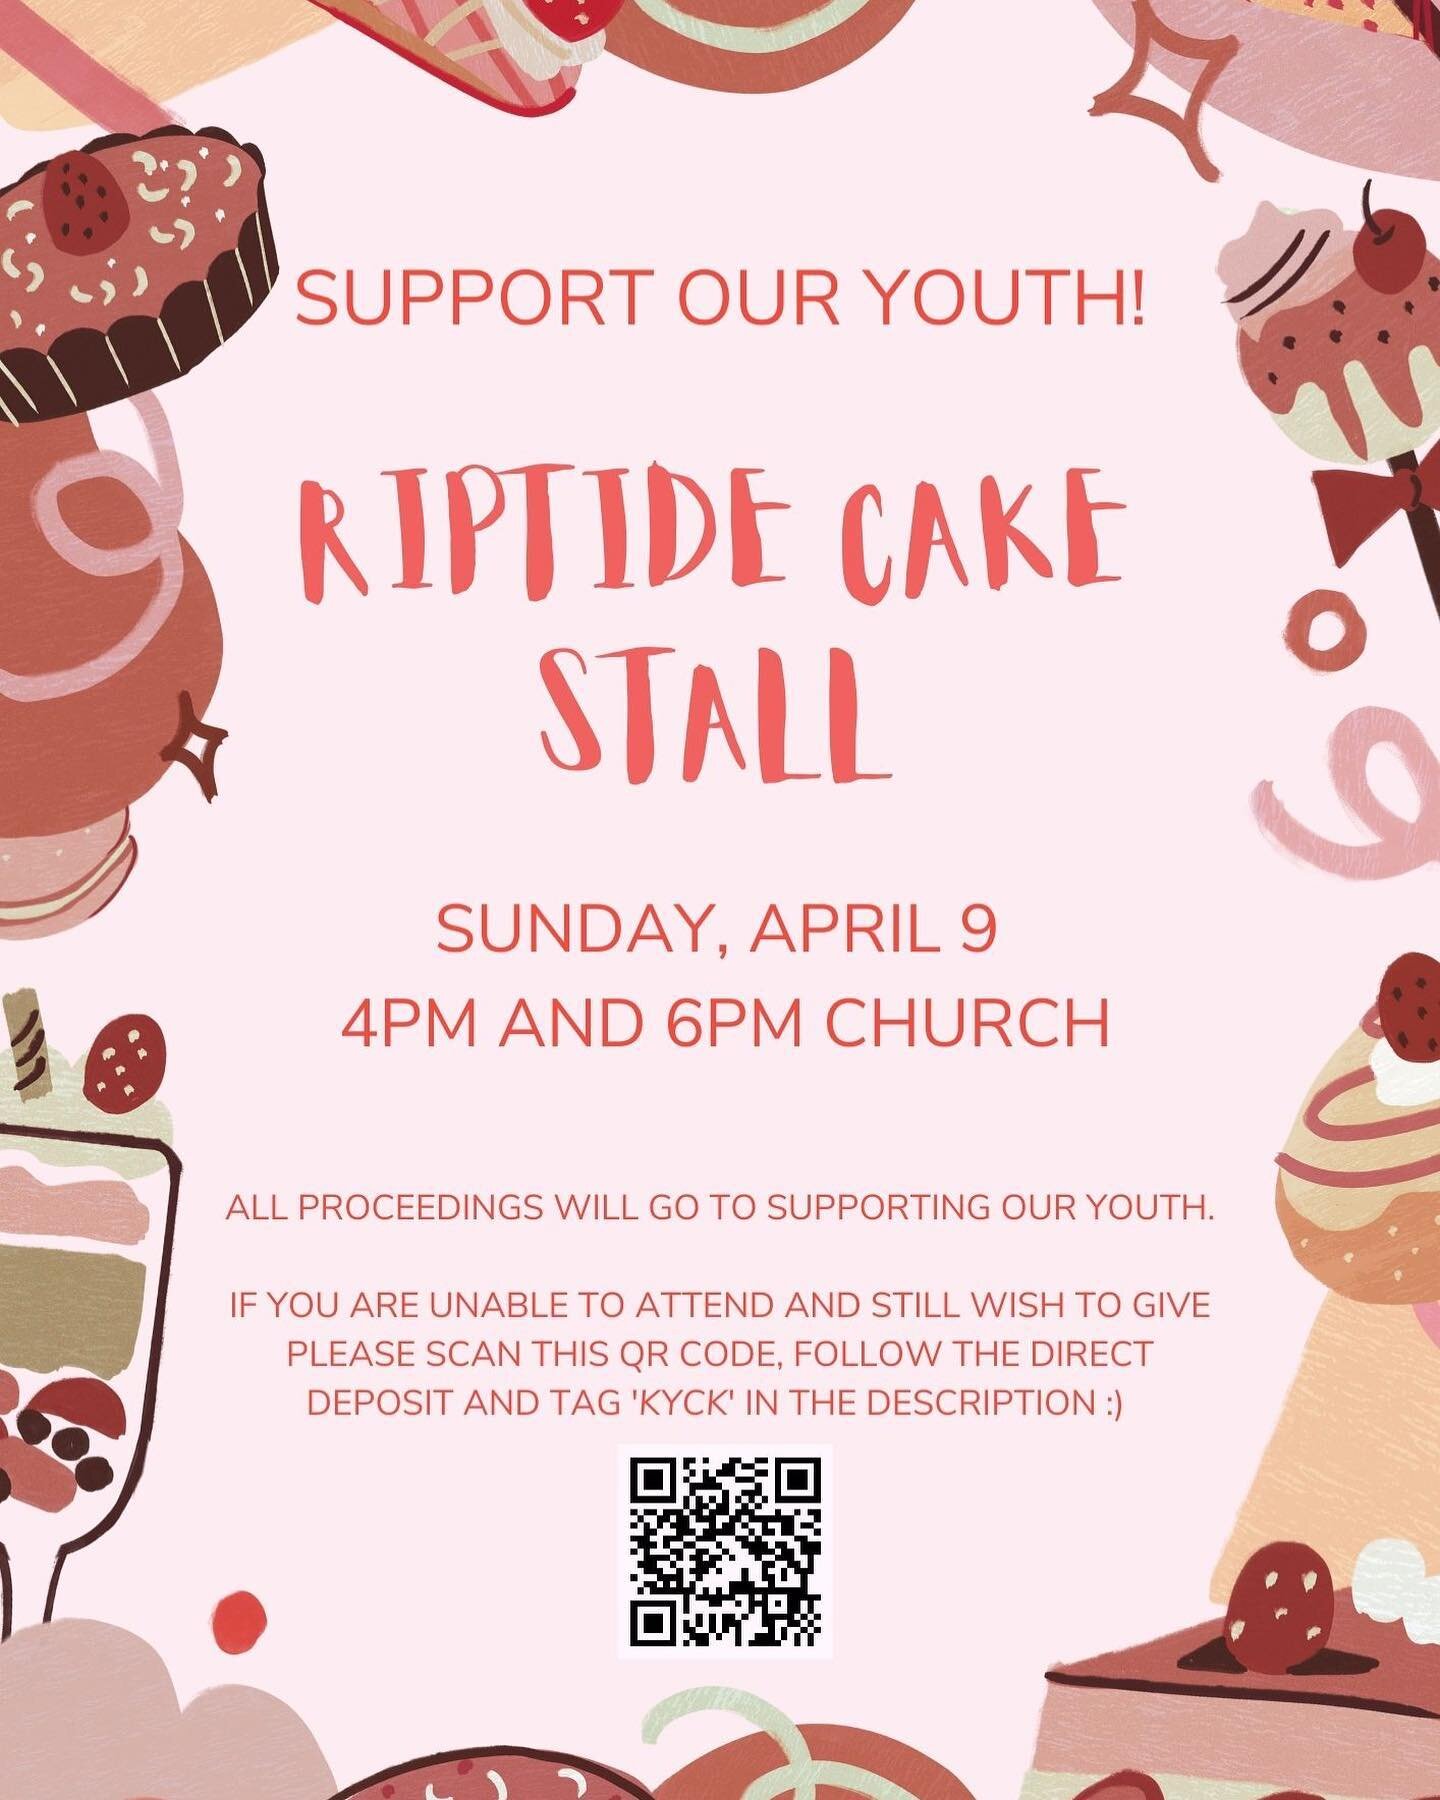 Come along this Sunday to support our youth as they raise money for KYCK with an overpriced cupcake stall! The stall will be at 4pm and 6pm. 
And if you&rsquo;re a youth and coming to KYCK don&rsquo;t forget to bring some baked goods along to sell!!